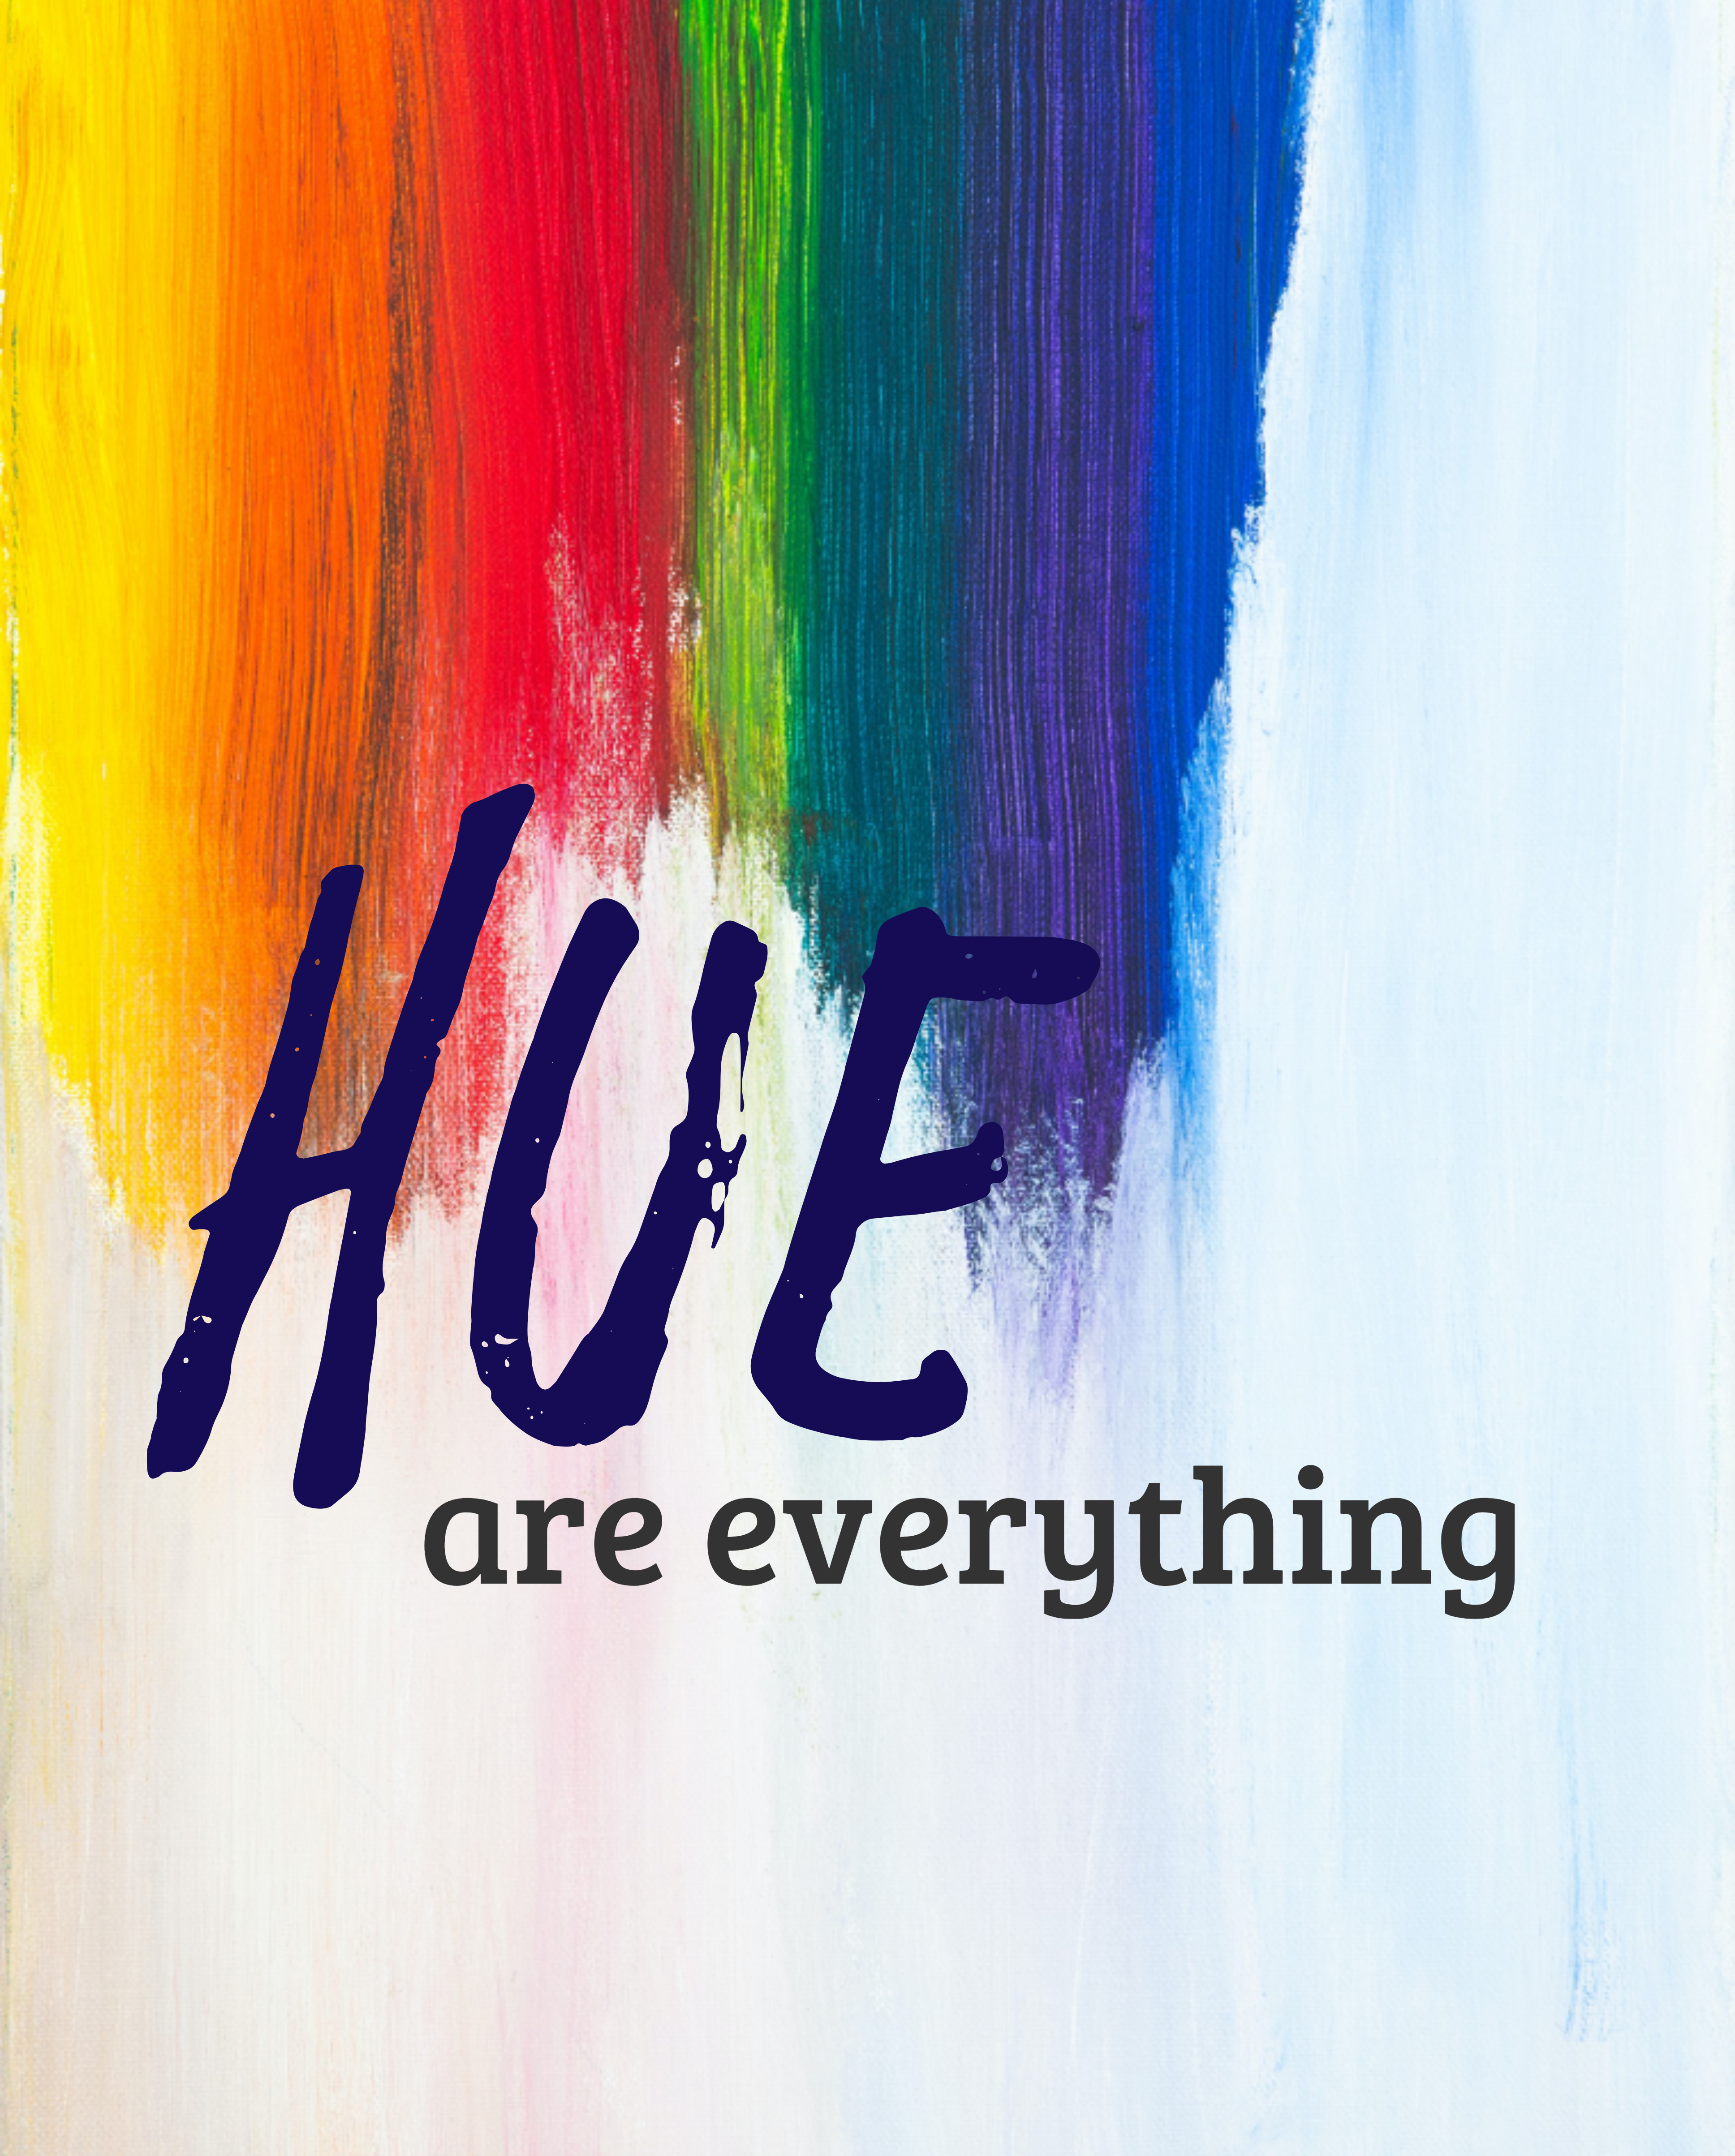 748-hue-are-everything